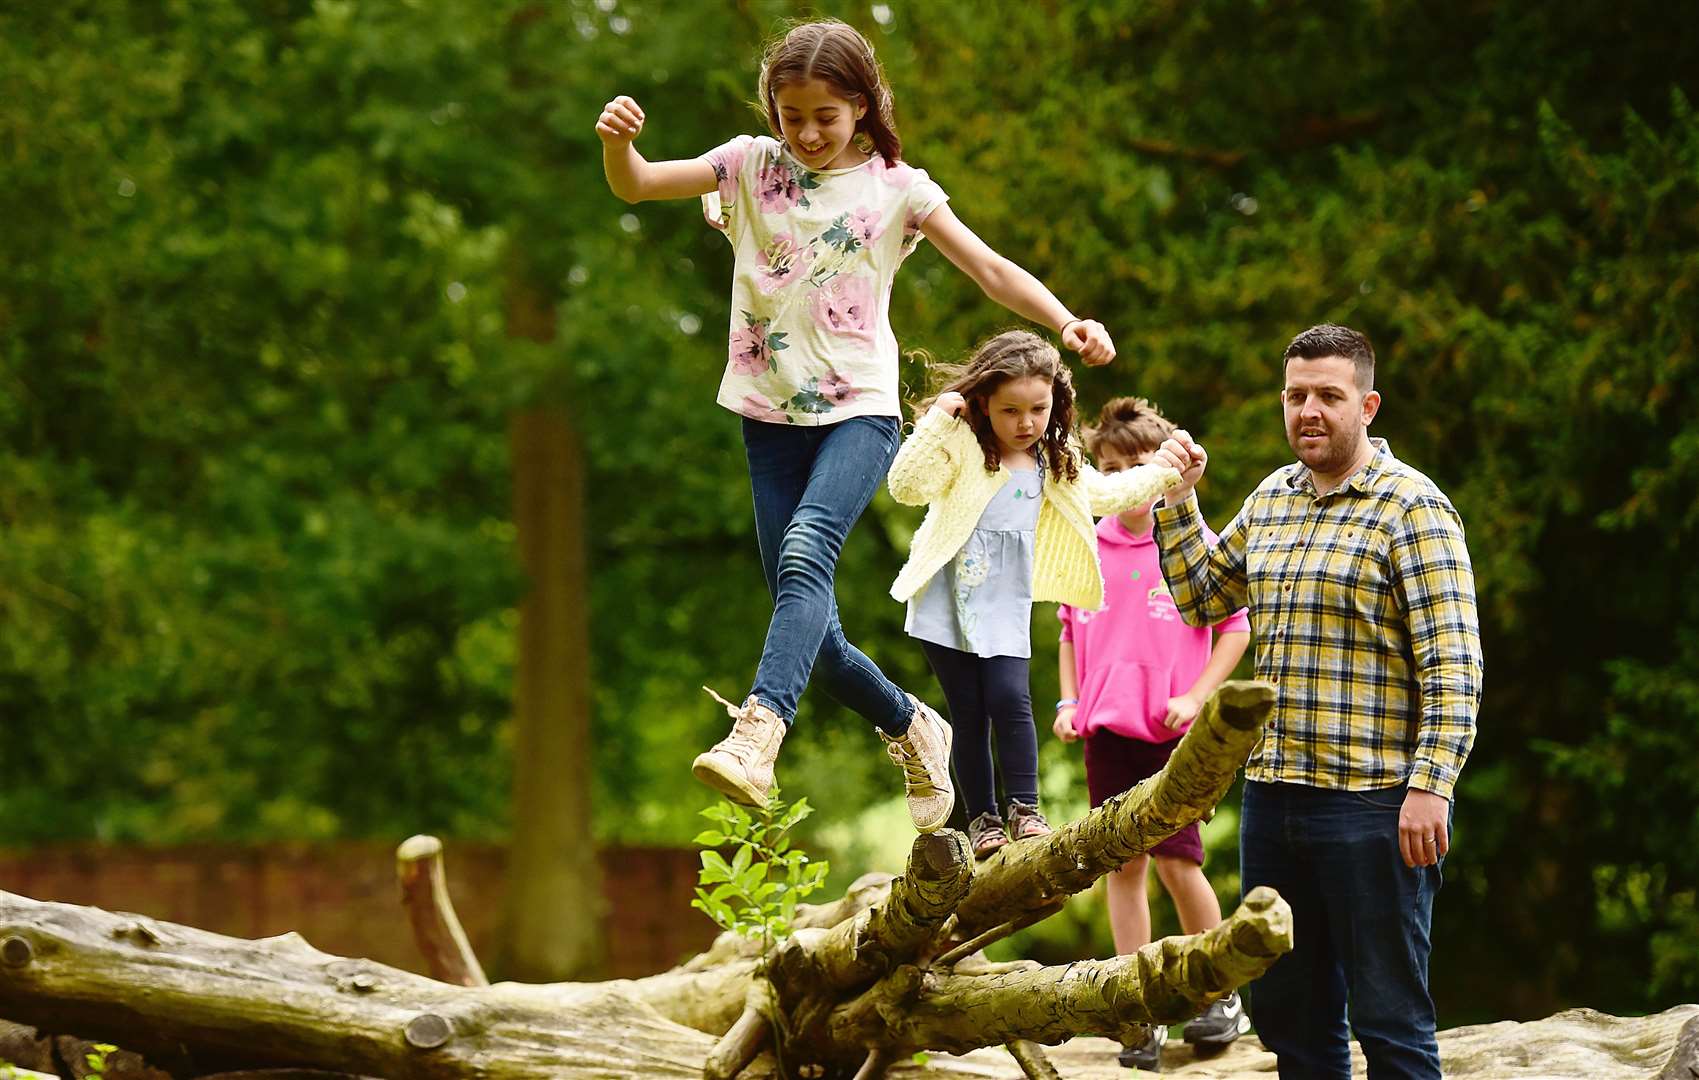 Events are going on across Kent for half term and the bank holiday weekend Picture: National Trust/John Millar